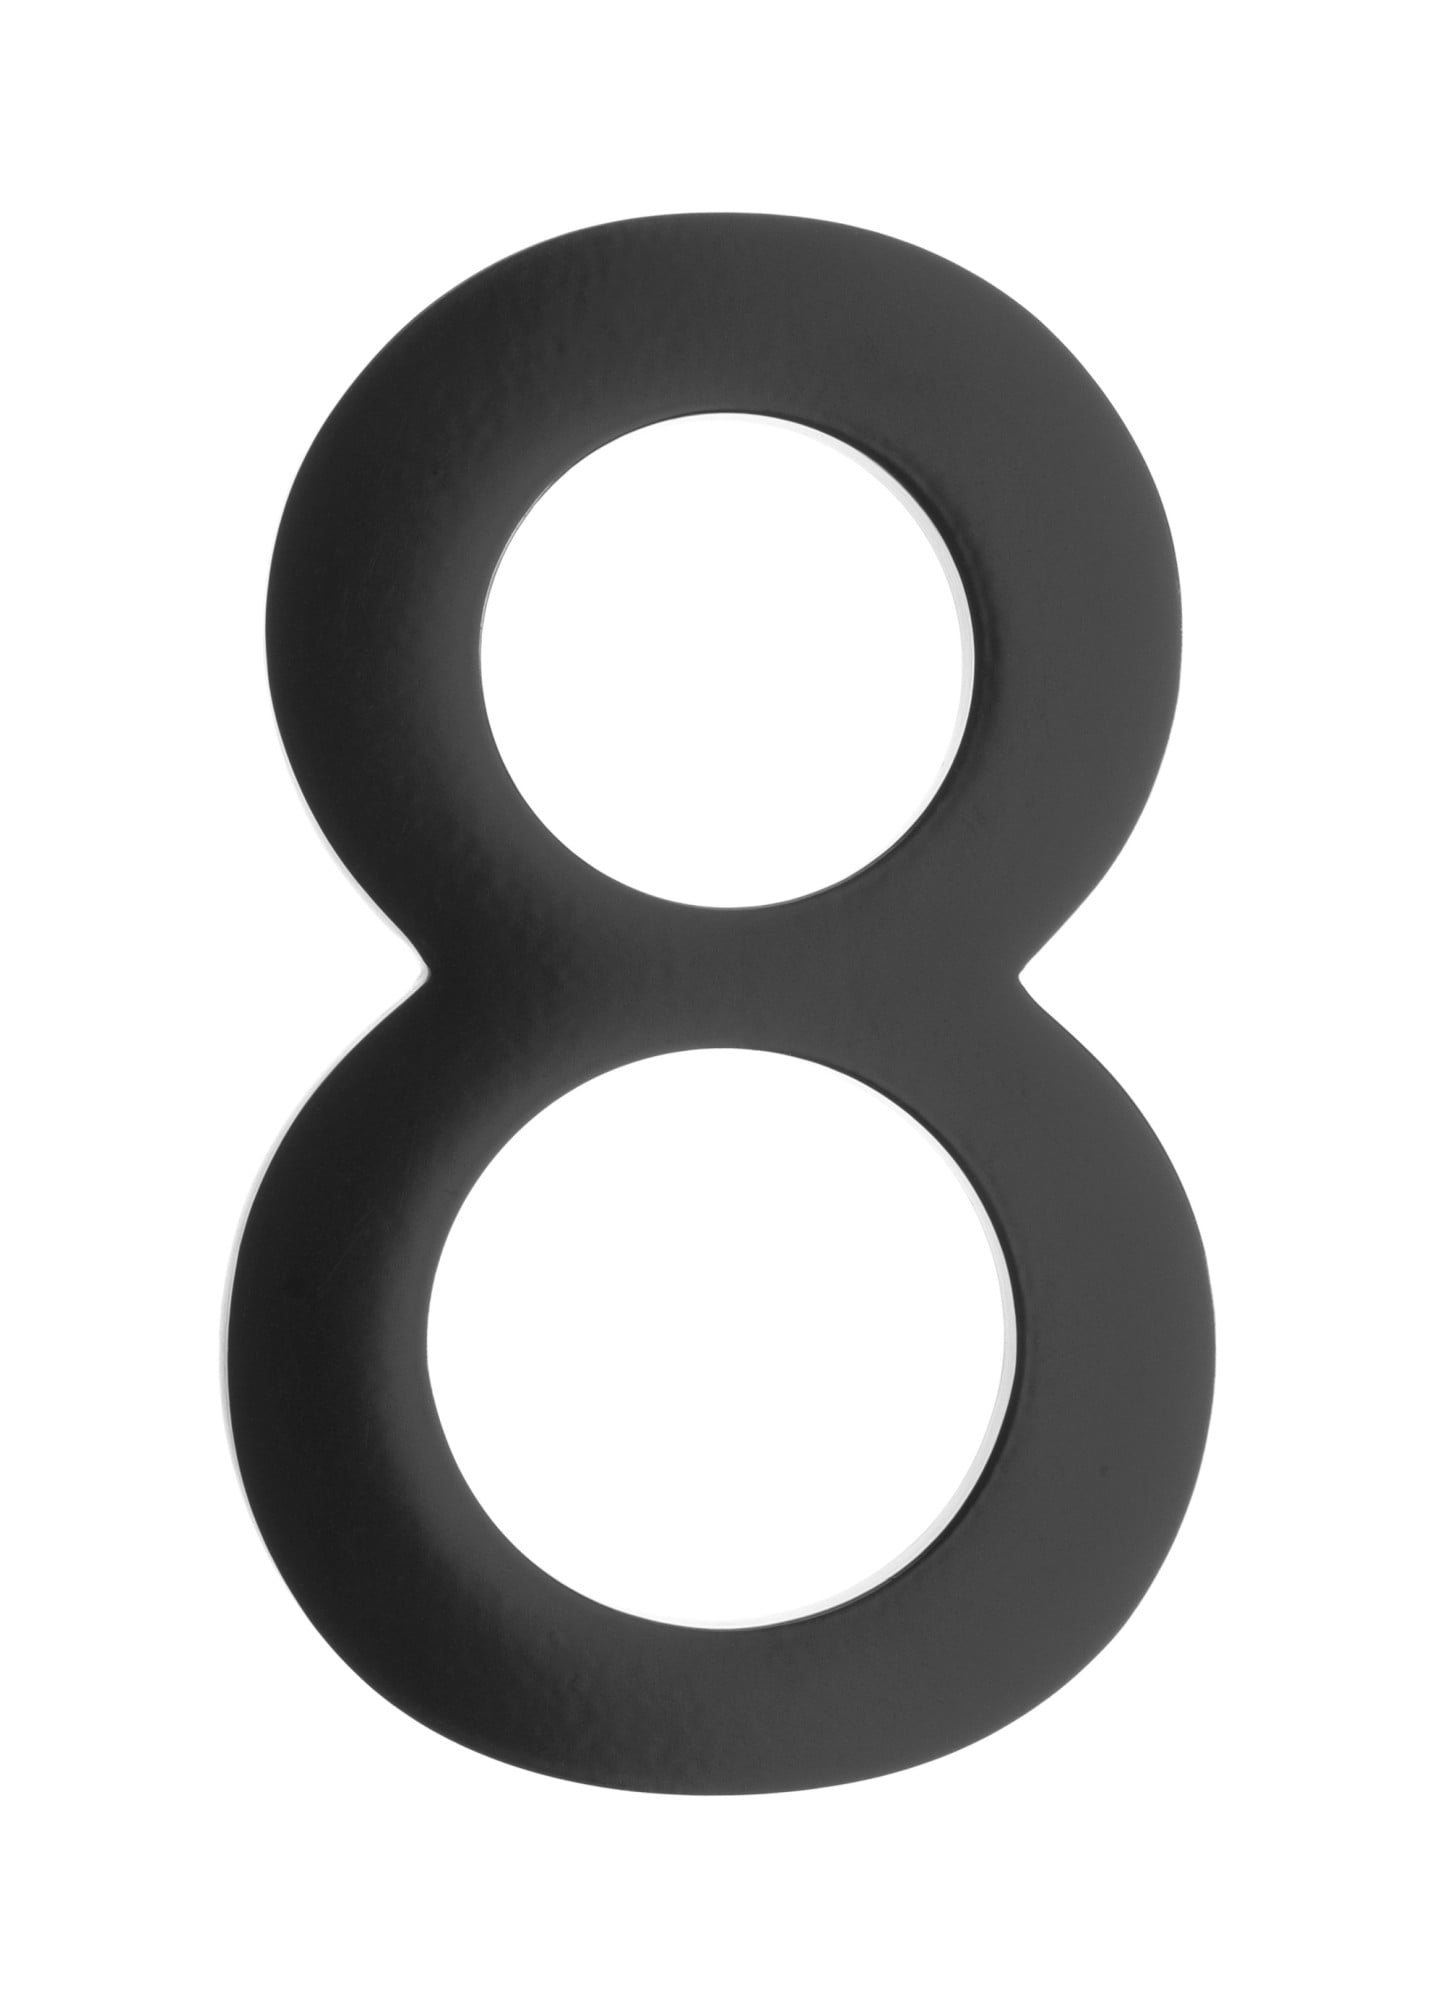 3582b-8 Floating House Number 8, Black - 4 In.